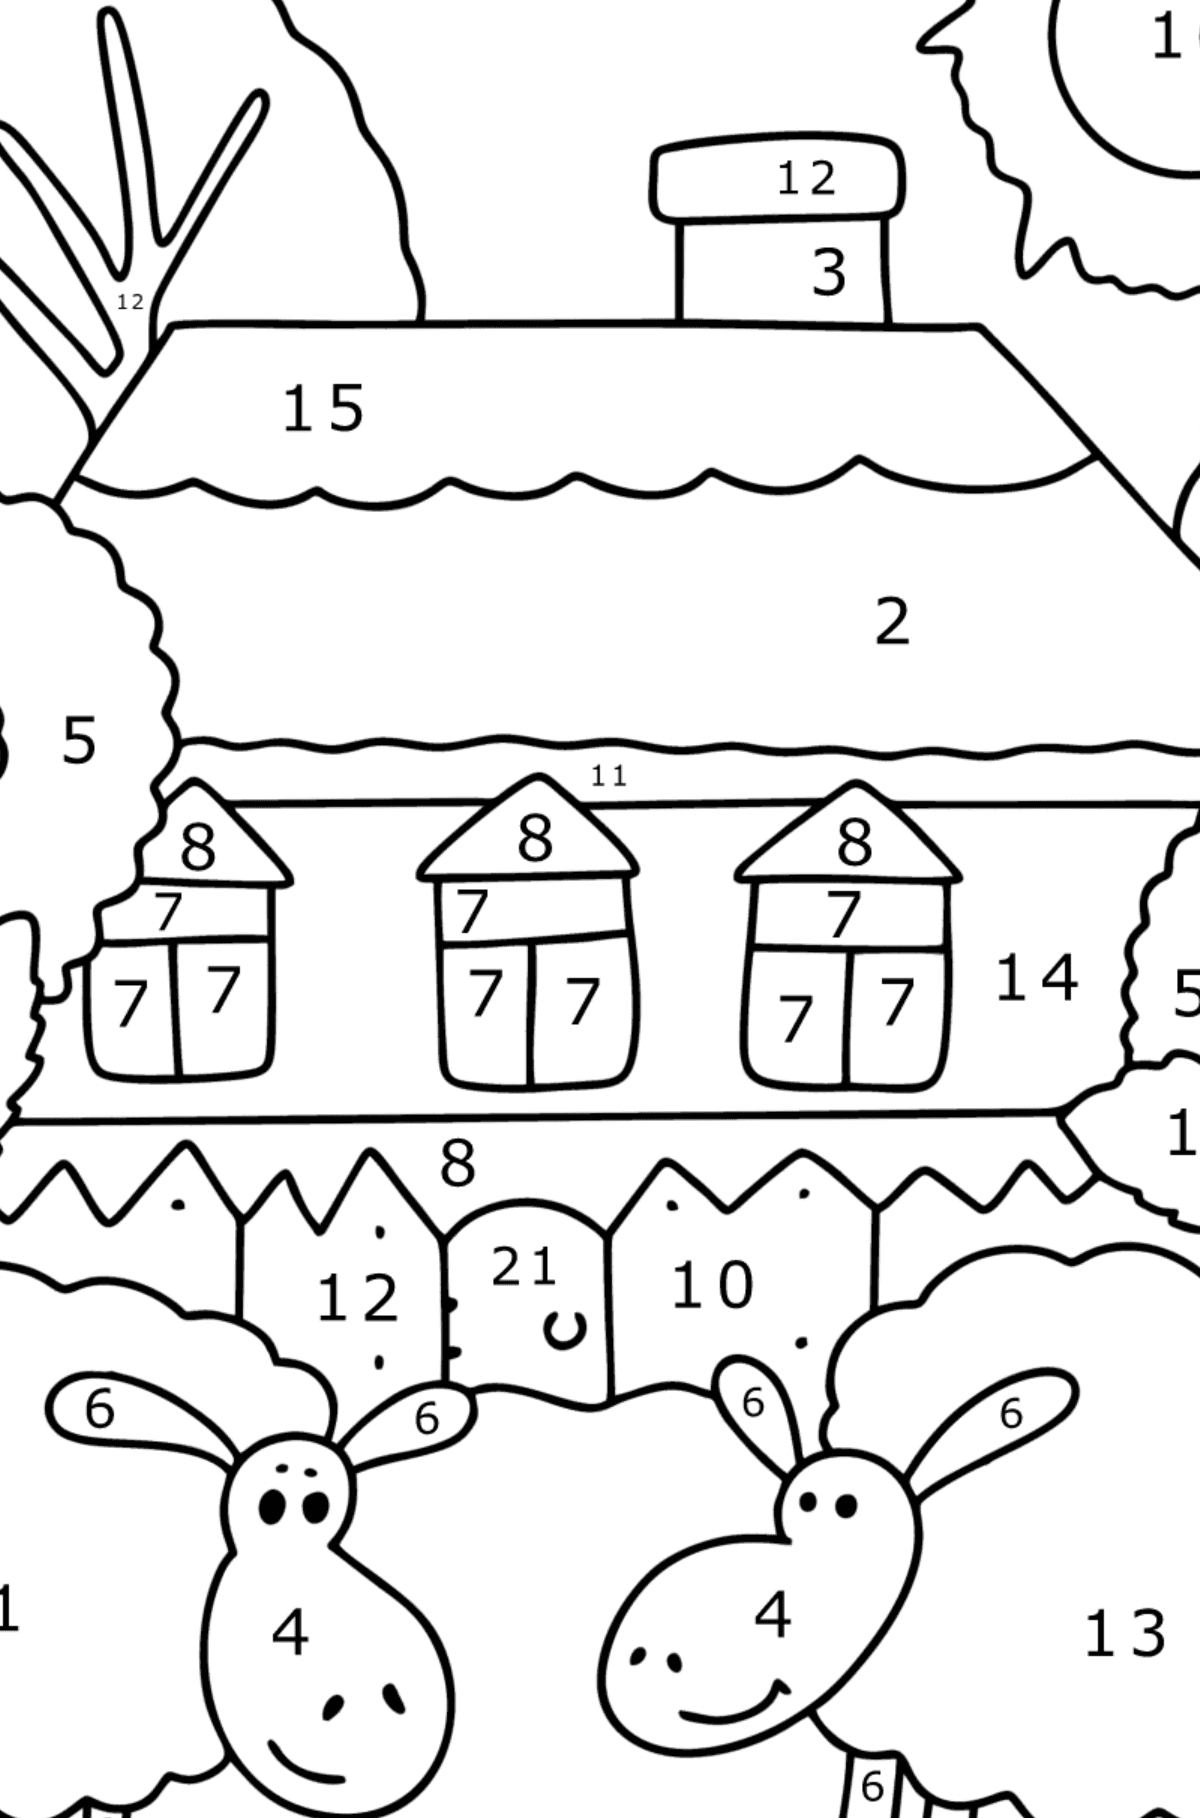 FarmHouse coloring page - Coloring by Numbers for Kids